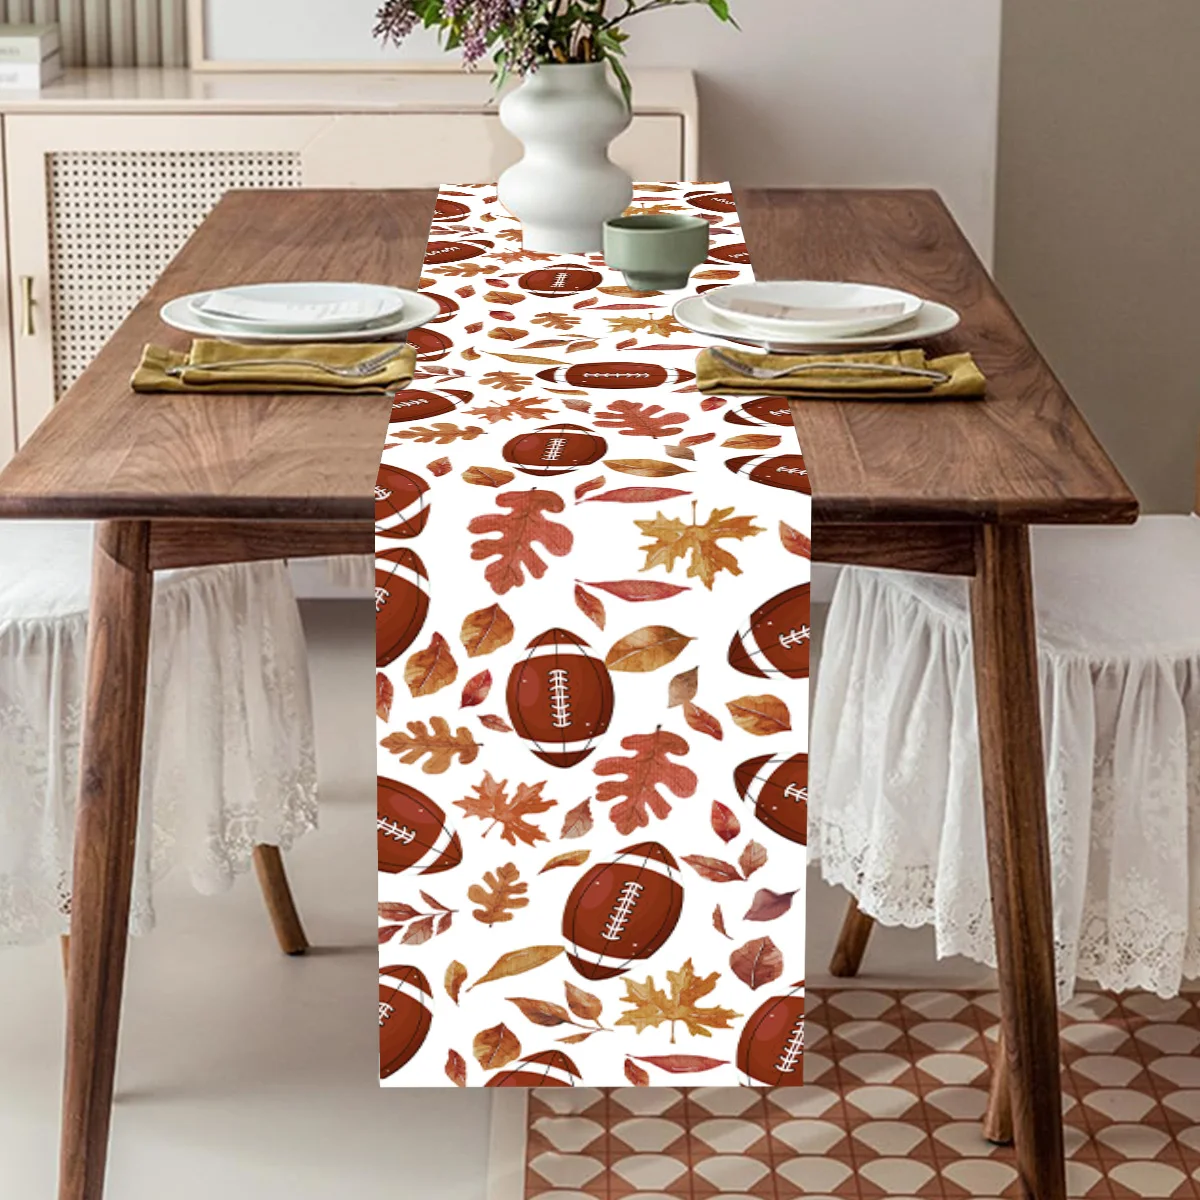 Rugby Football Sport Theme Table Runner Touch Down Football Birthday Party Decoration Kids Boy Baby Shower Home Table Decor